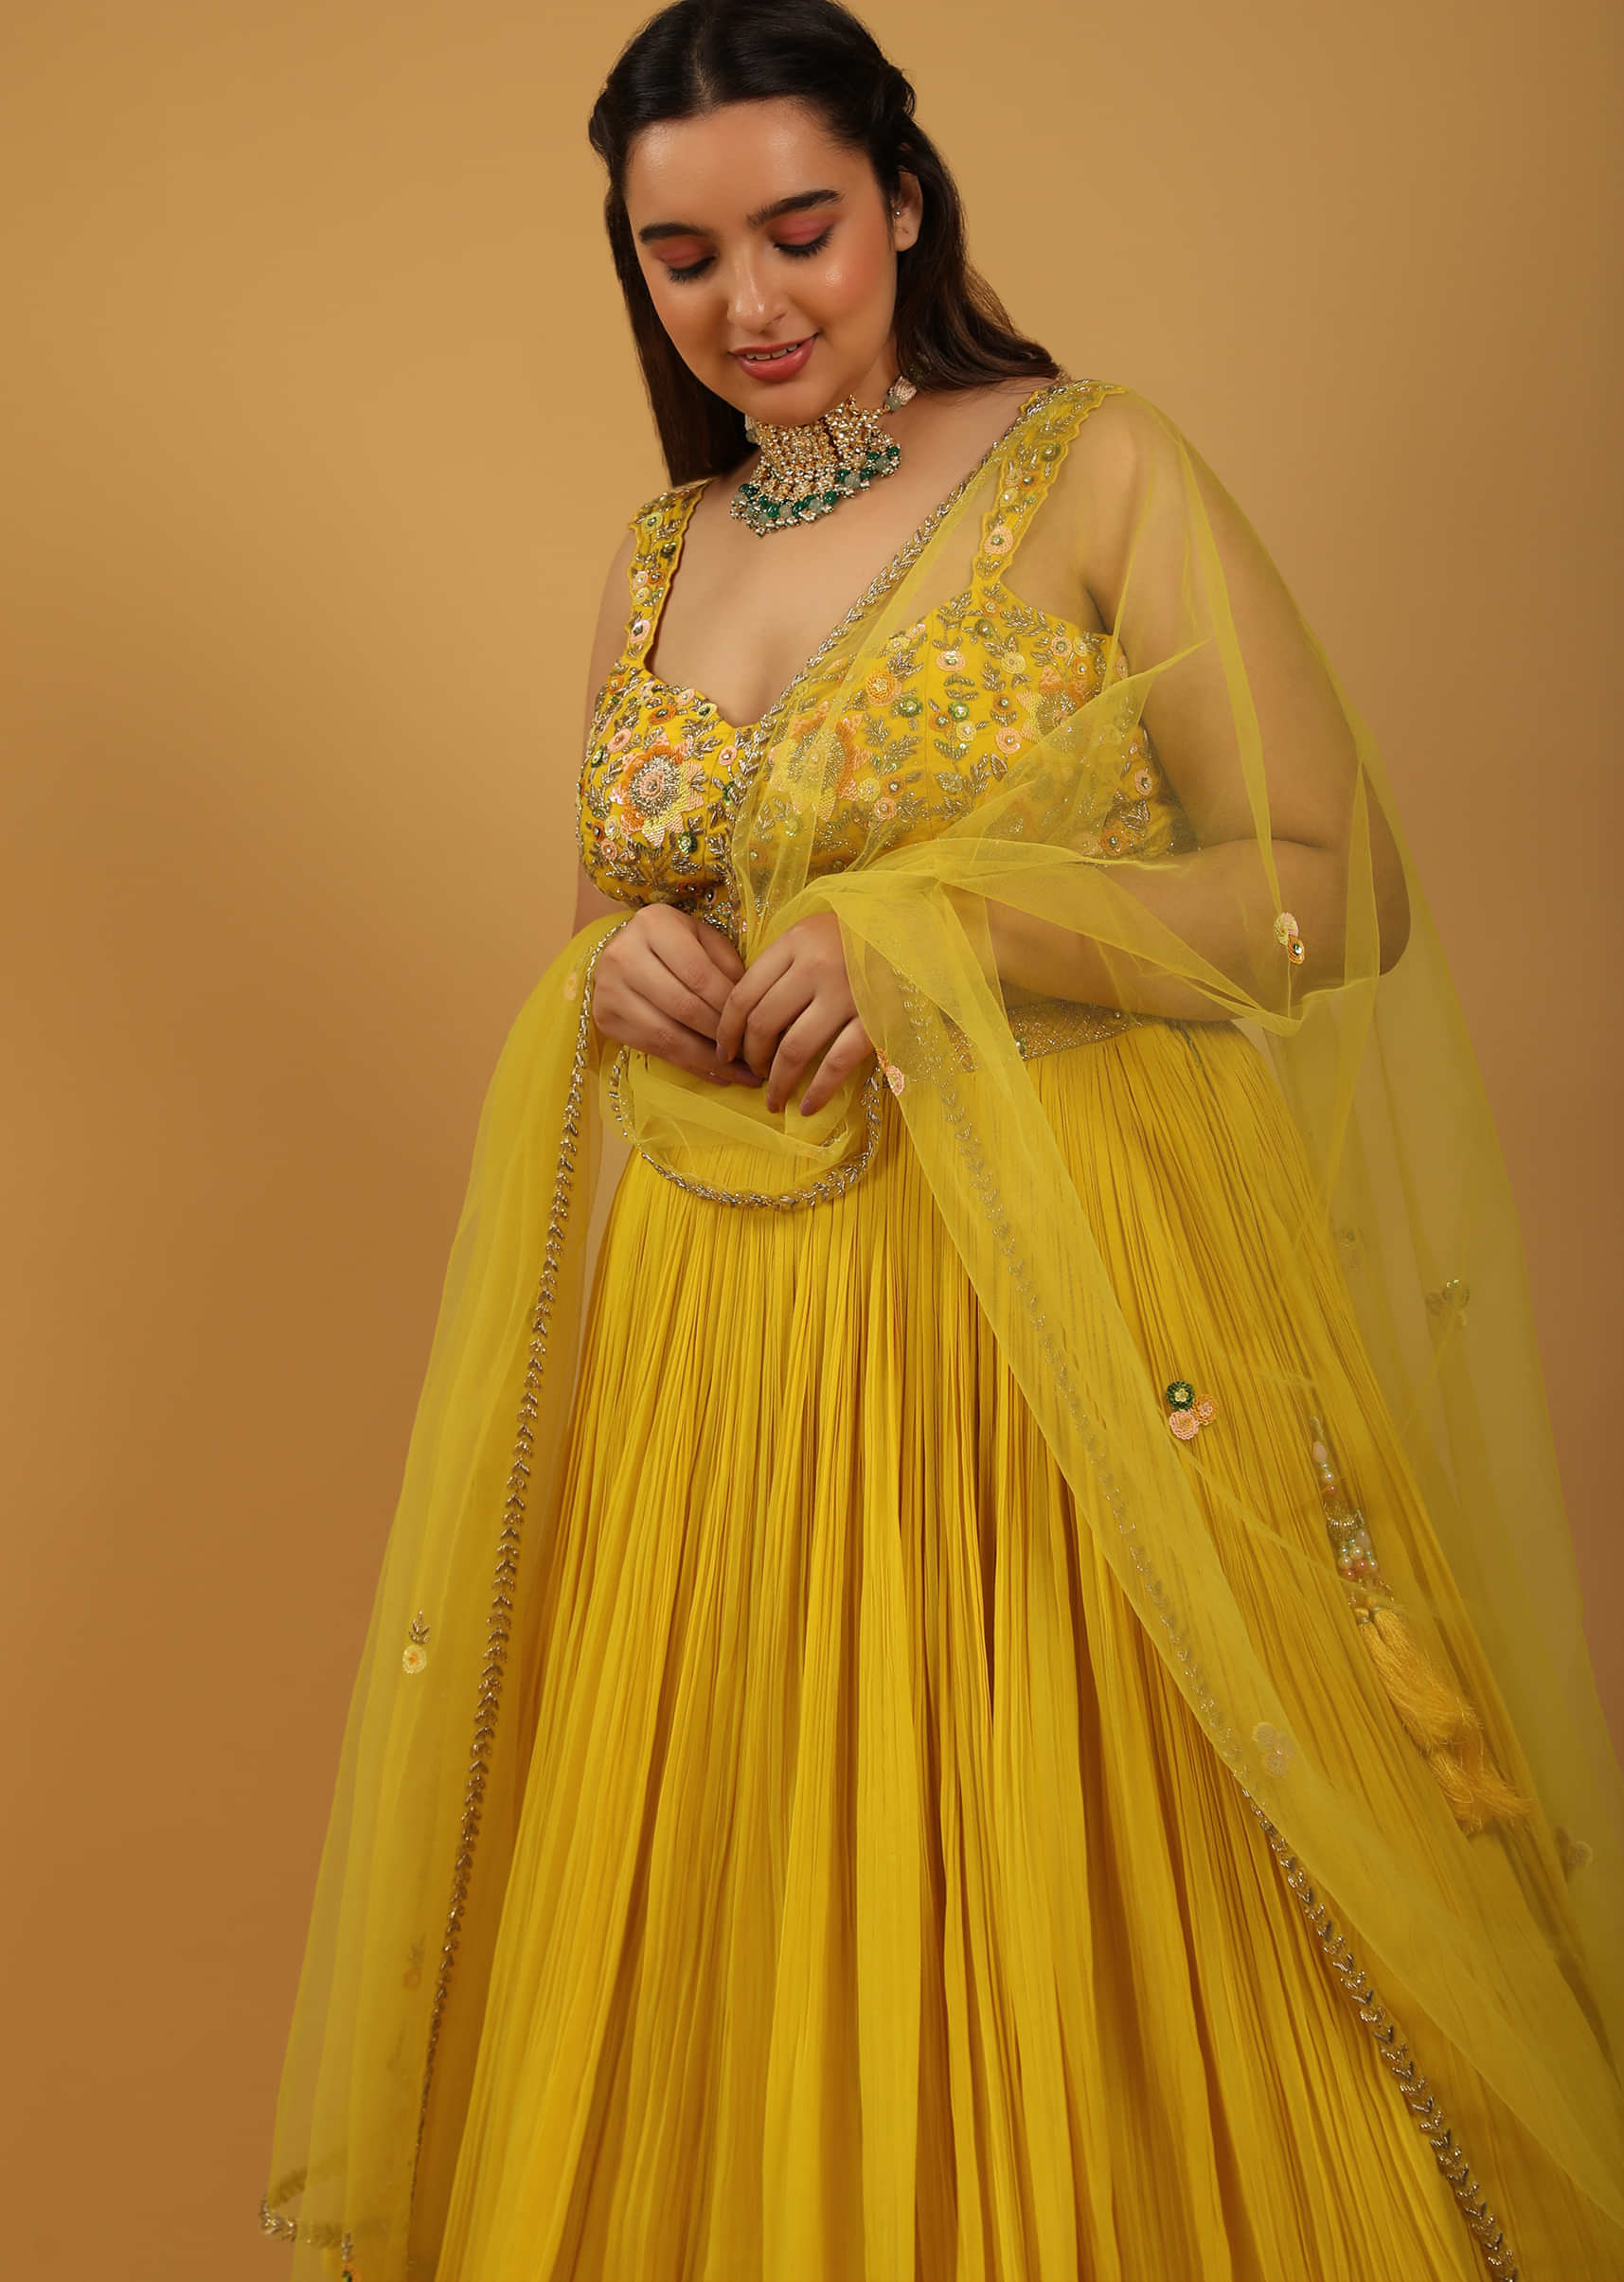 Sun-Yellow Gathered Lehenga With Hand-Embroidered Blouse In Floral Patterns and Sequins